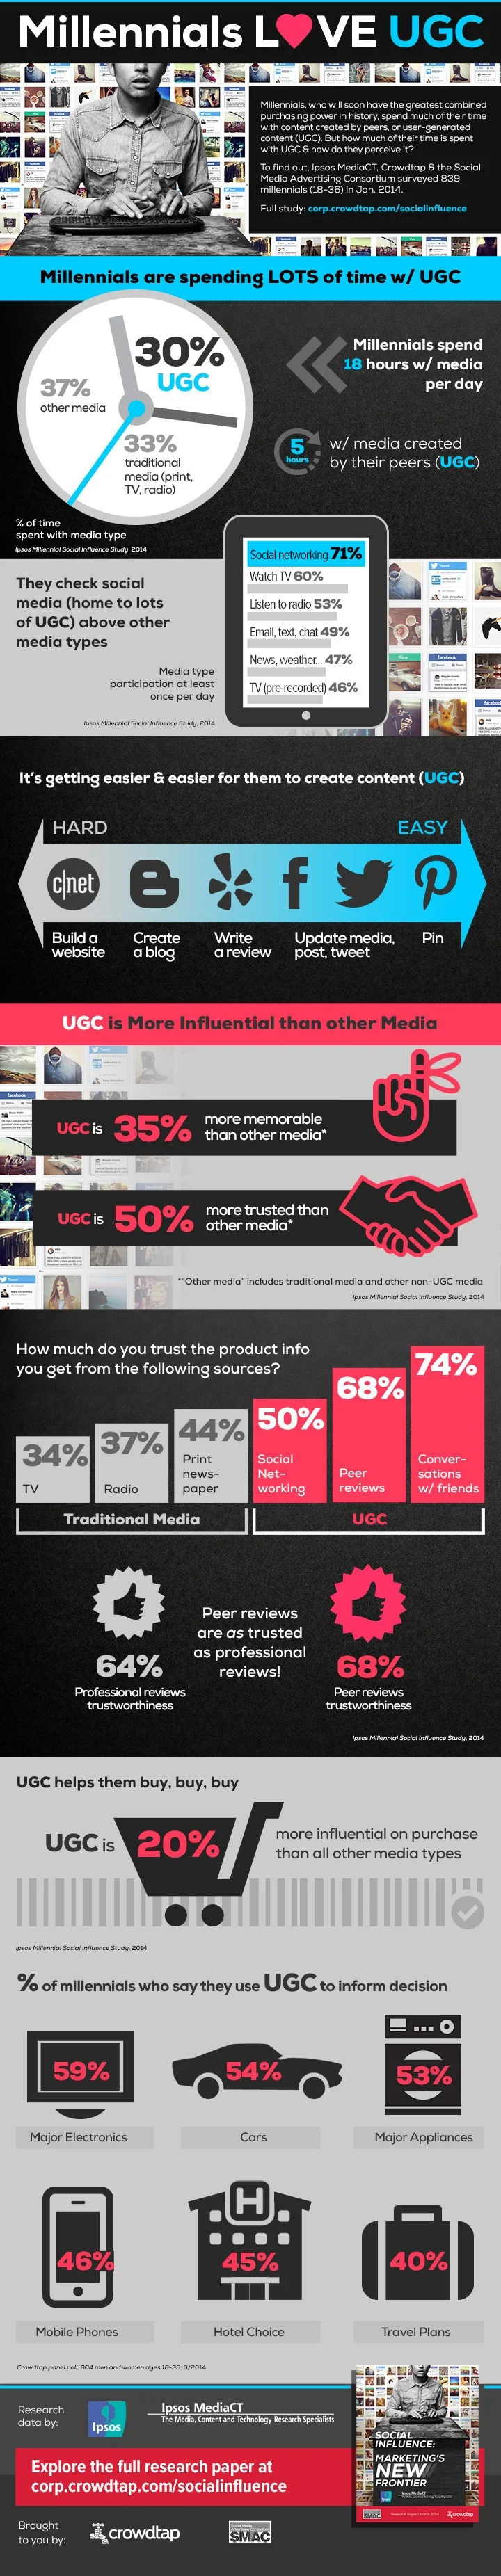 Millennials Love User Generated Content - infographic